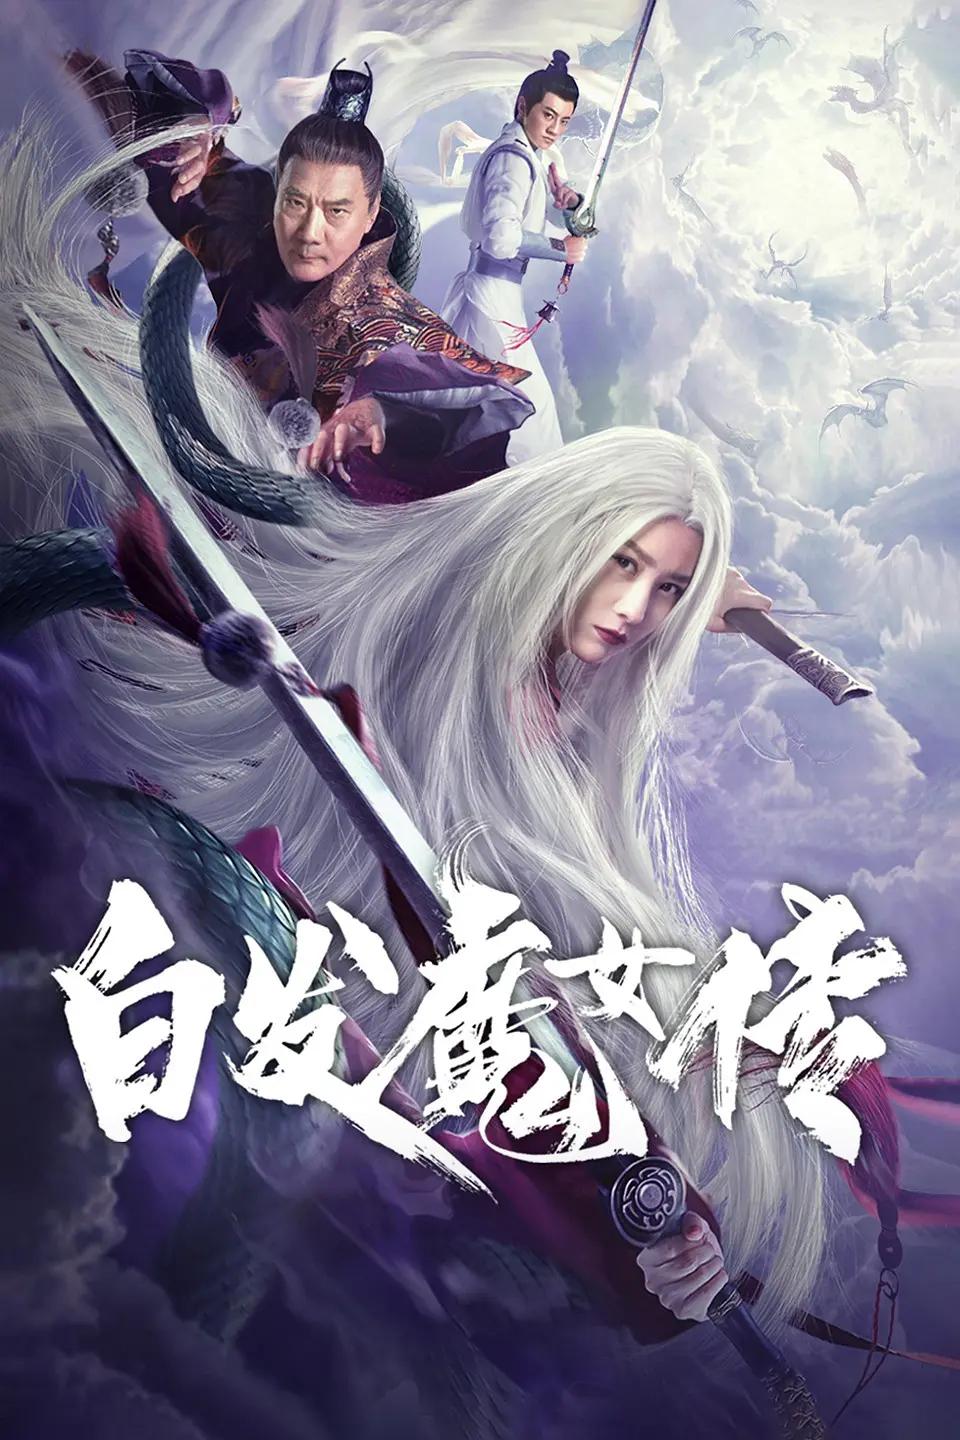 White Haired Devil Lady 2020 Dual Audio Hindi ORG 400MB HDRip 720p HEVC x265 Free Download